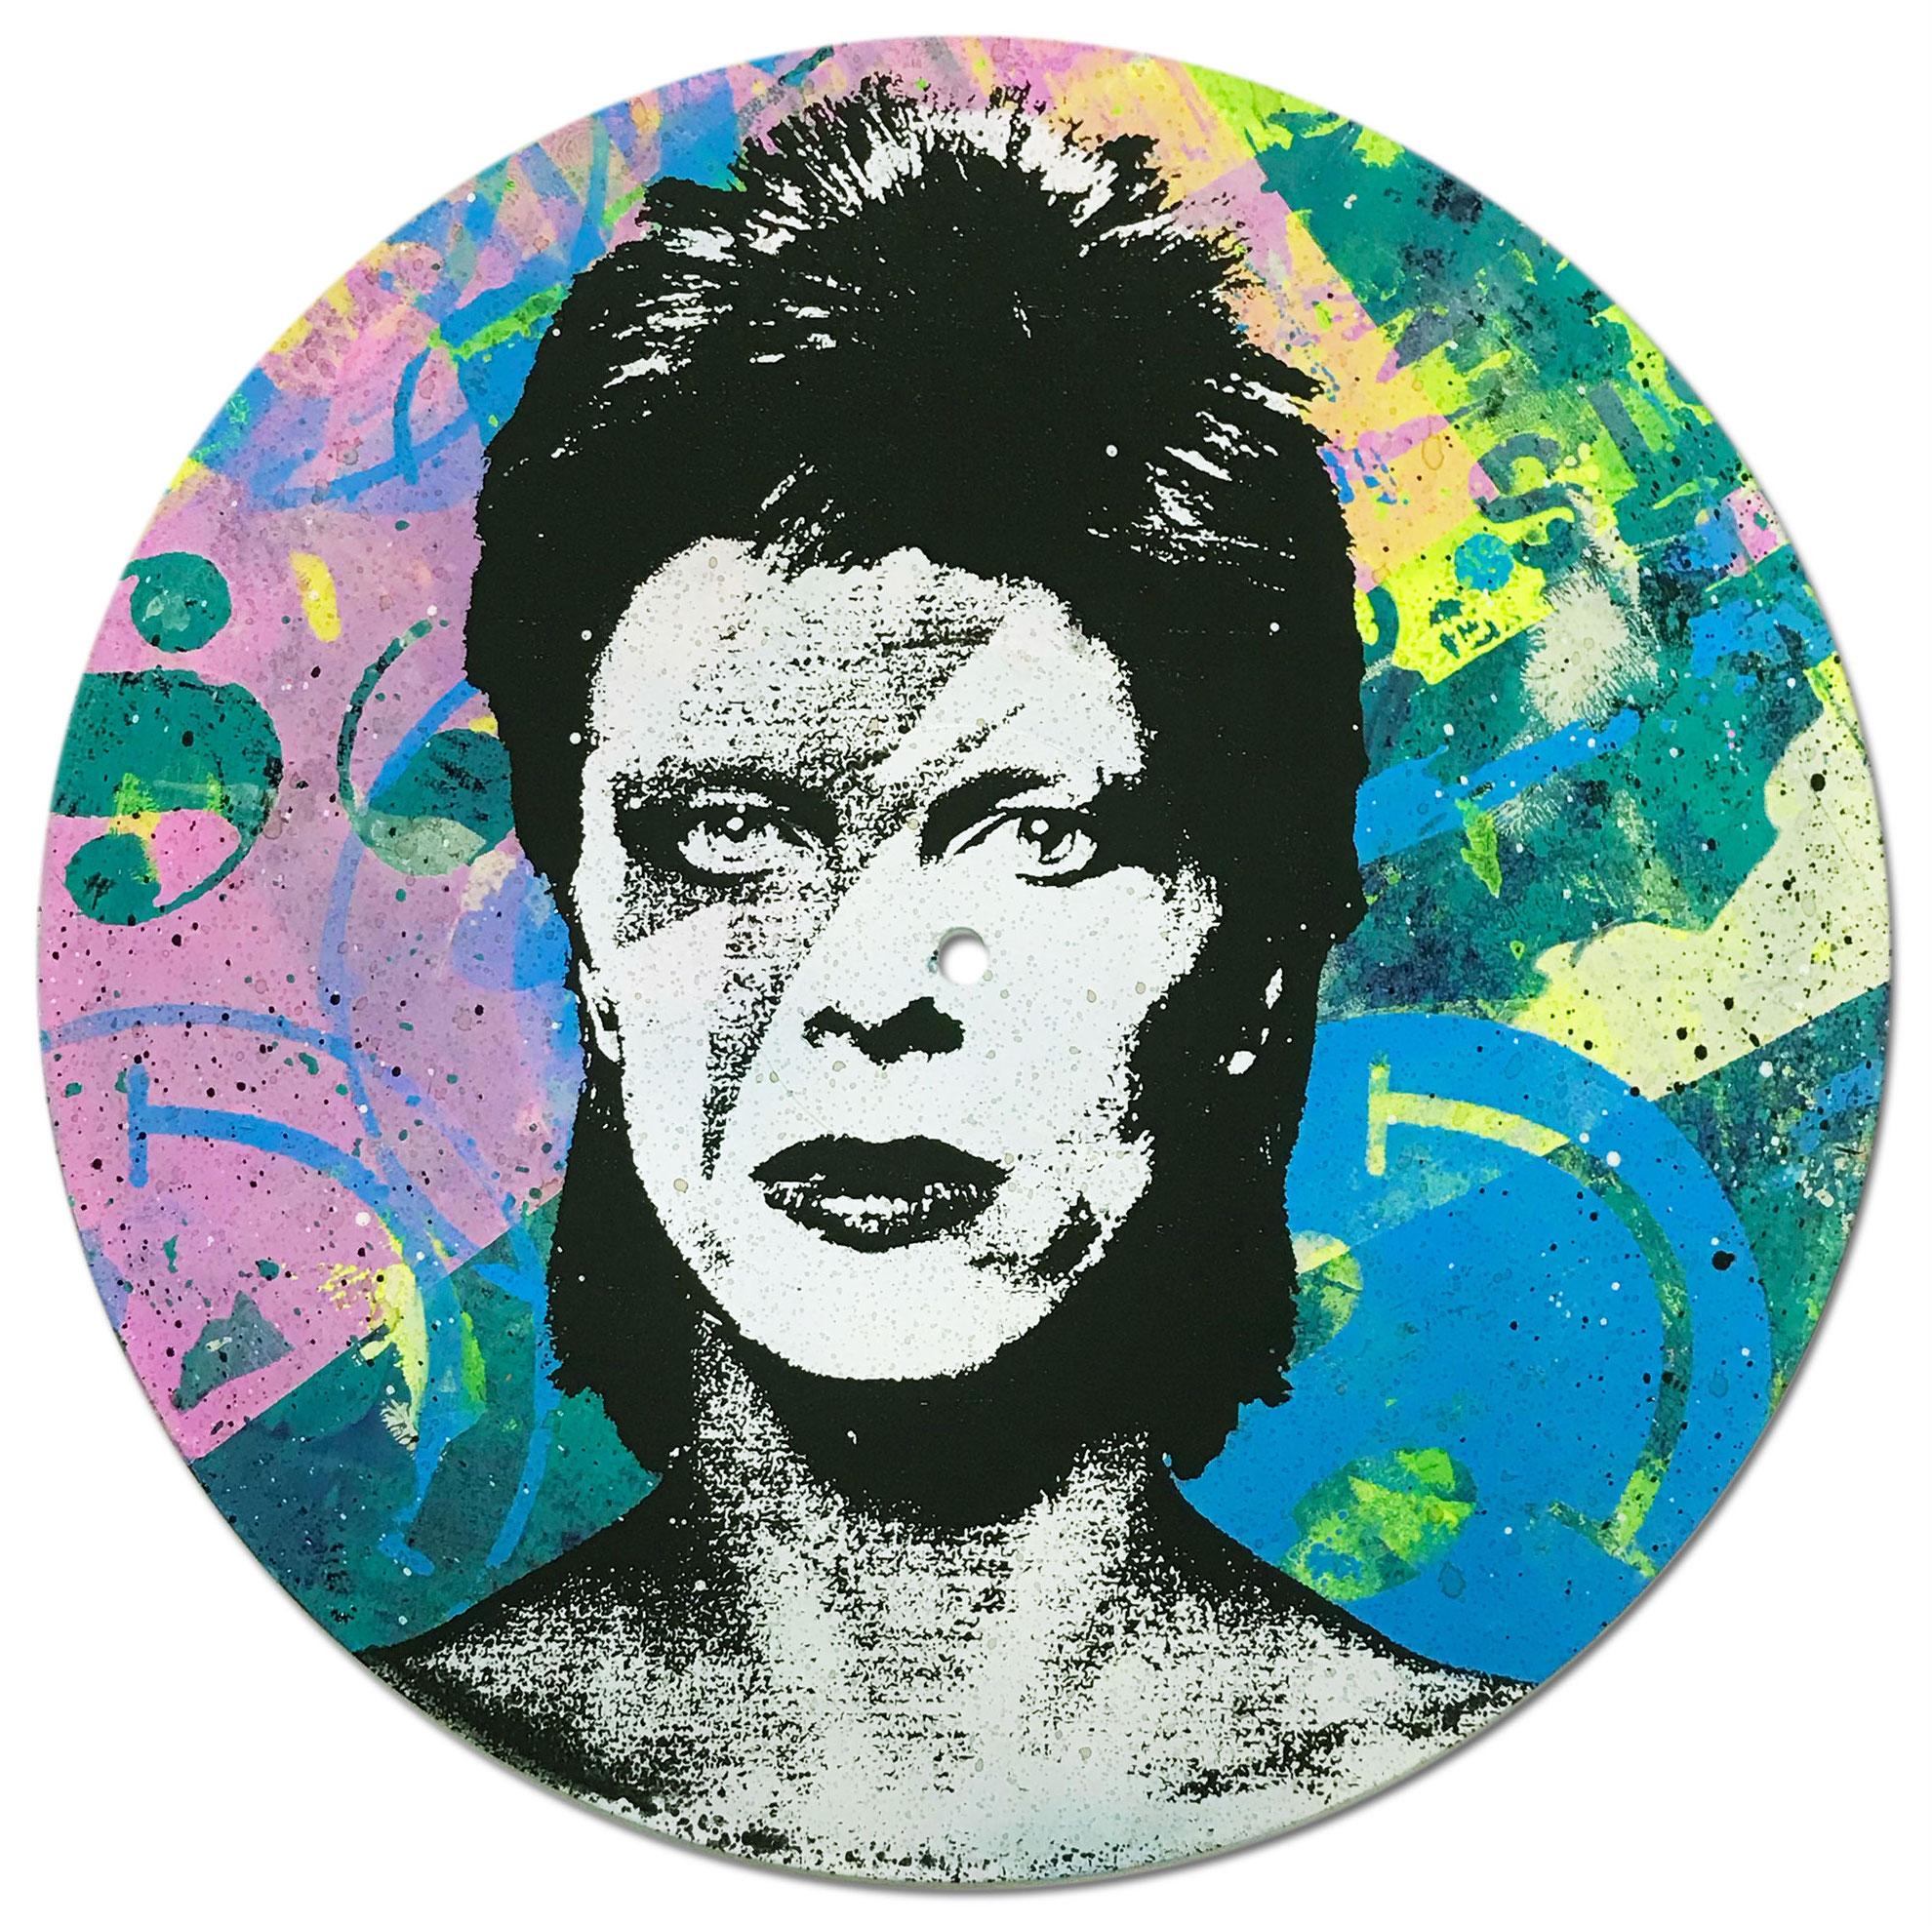 David Bowie Vinyl 1-10 Greg Gossel Pop Art LP Record (Singles & Sets Available)

Available Editions: 2,3,4,5,7,8,9,10

These vinyl LP's were created for Greg Gossel's show 